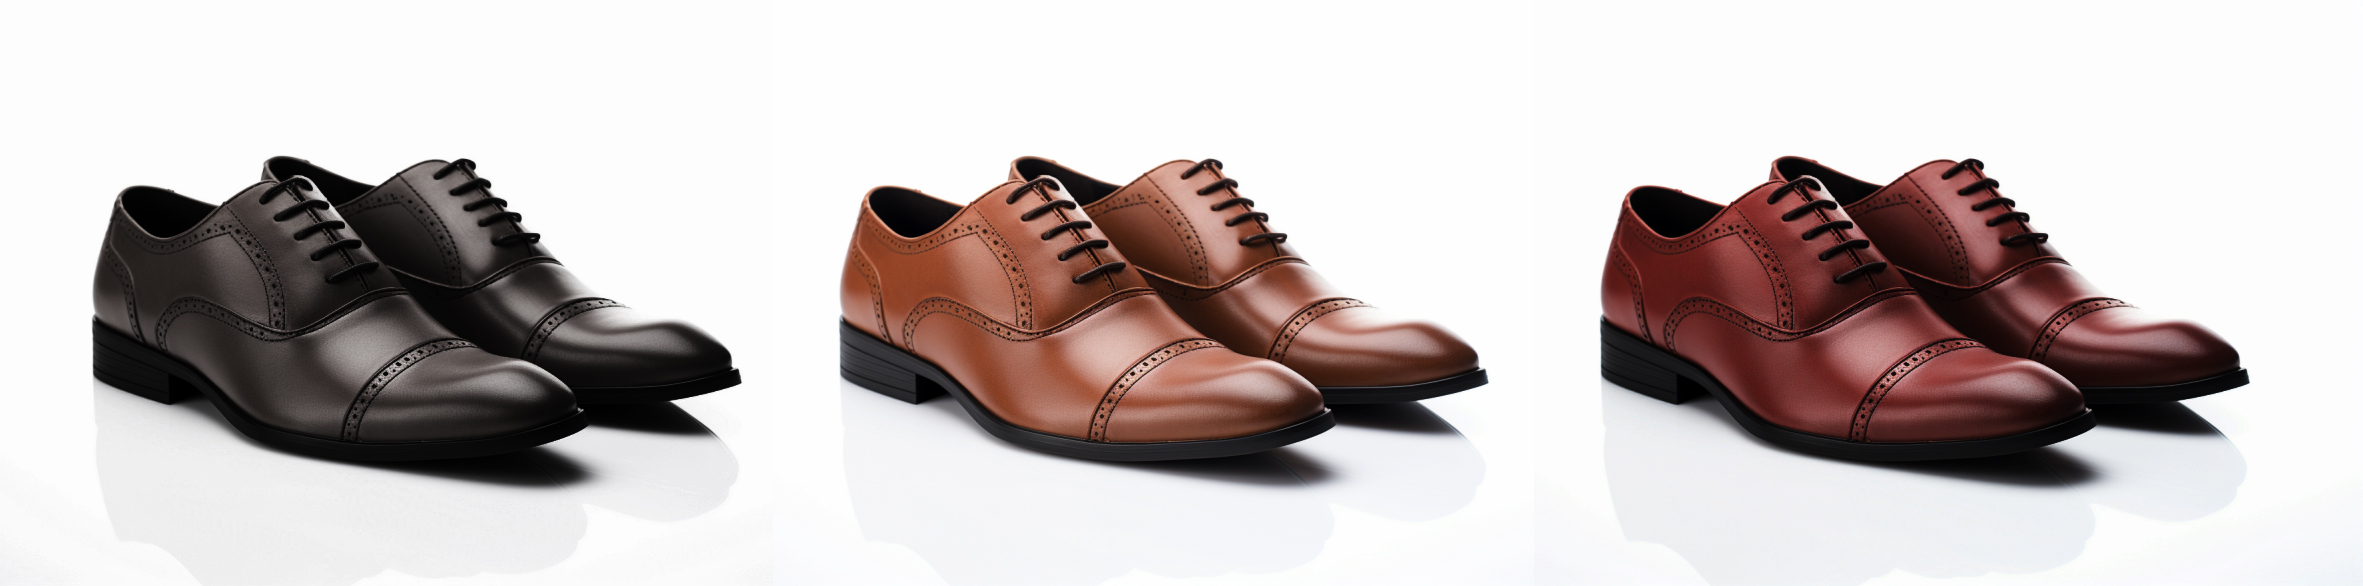 How to Match Your Shoes to Your Suit | Kater Shop Blog-cheohanoi.vn